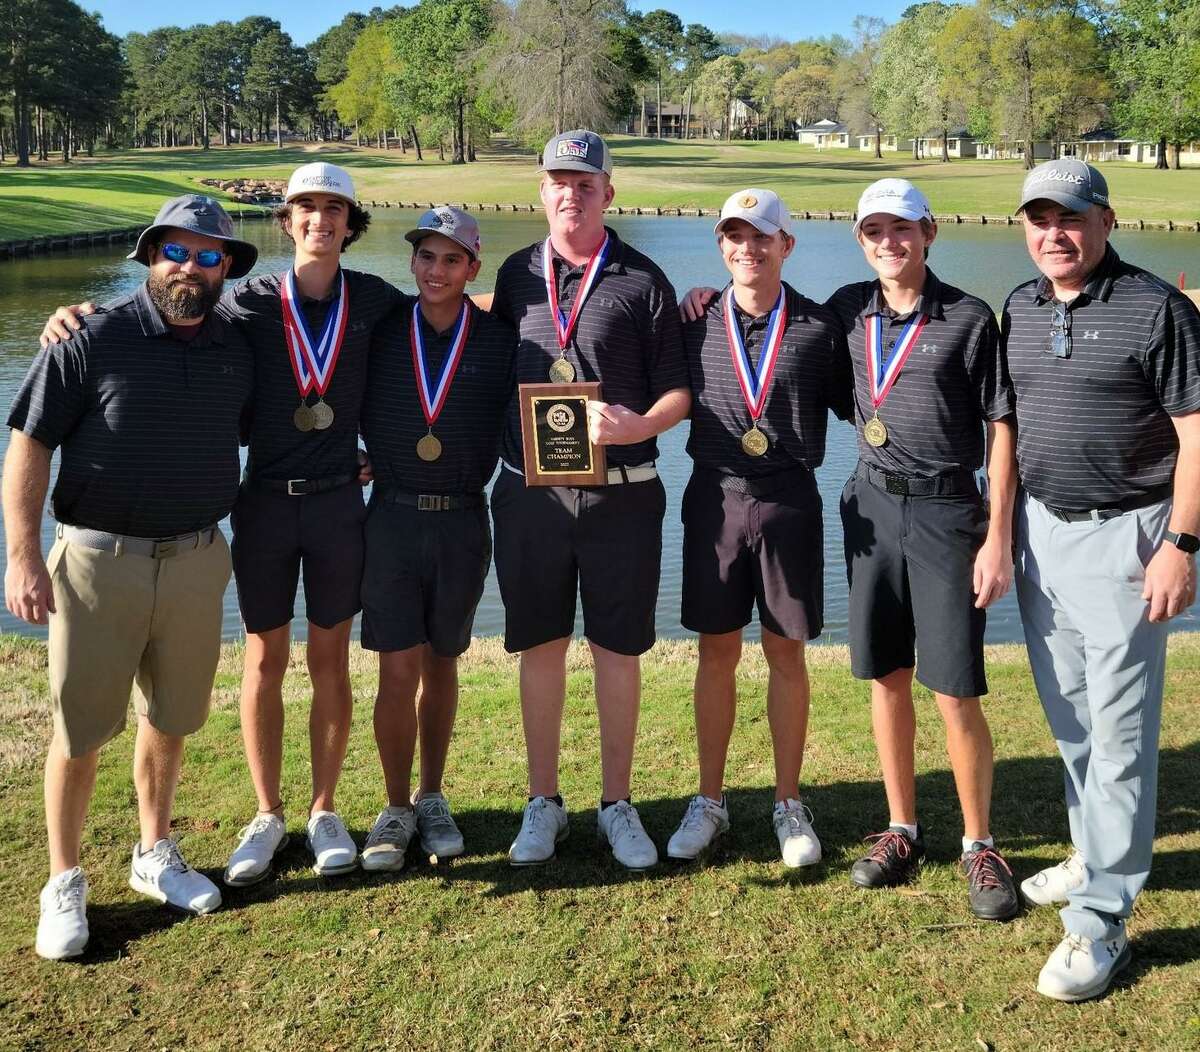 The Magnolia West boys golf team won the District 19-5A tournament Wednesday March 30, 2022 at The Golf Club at Margaritaville Lake Resort.